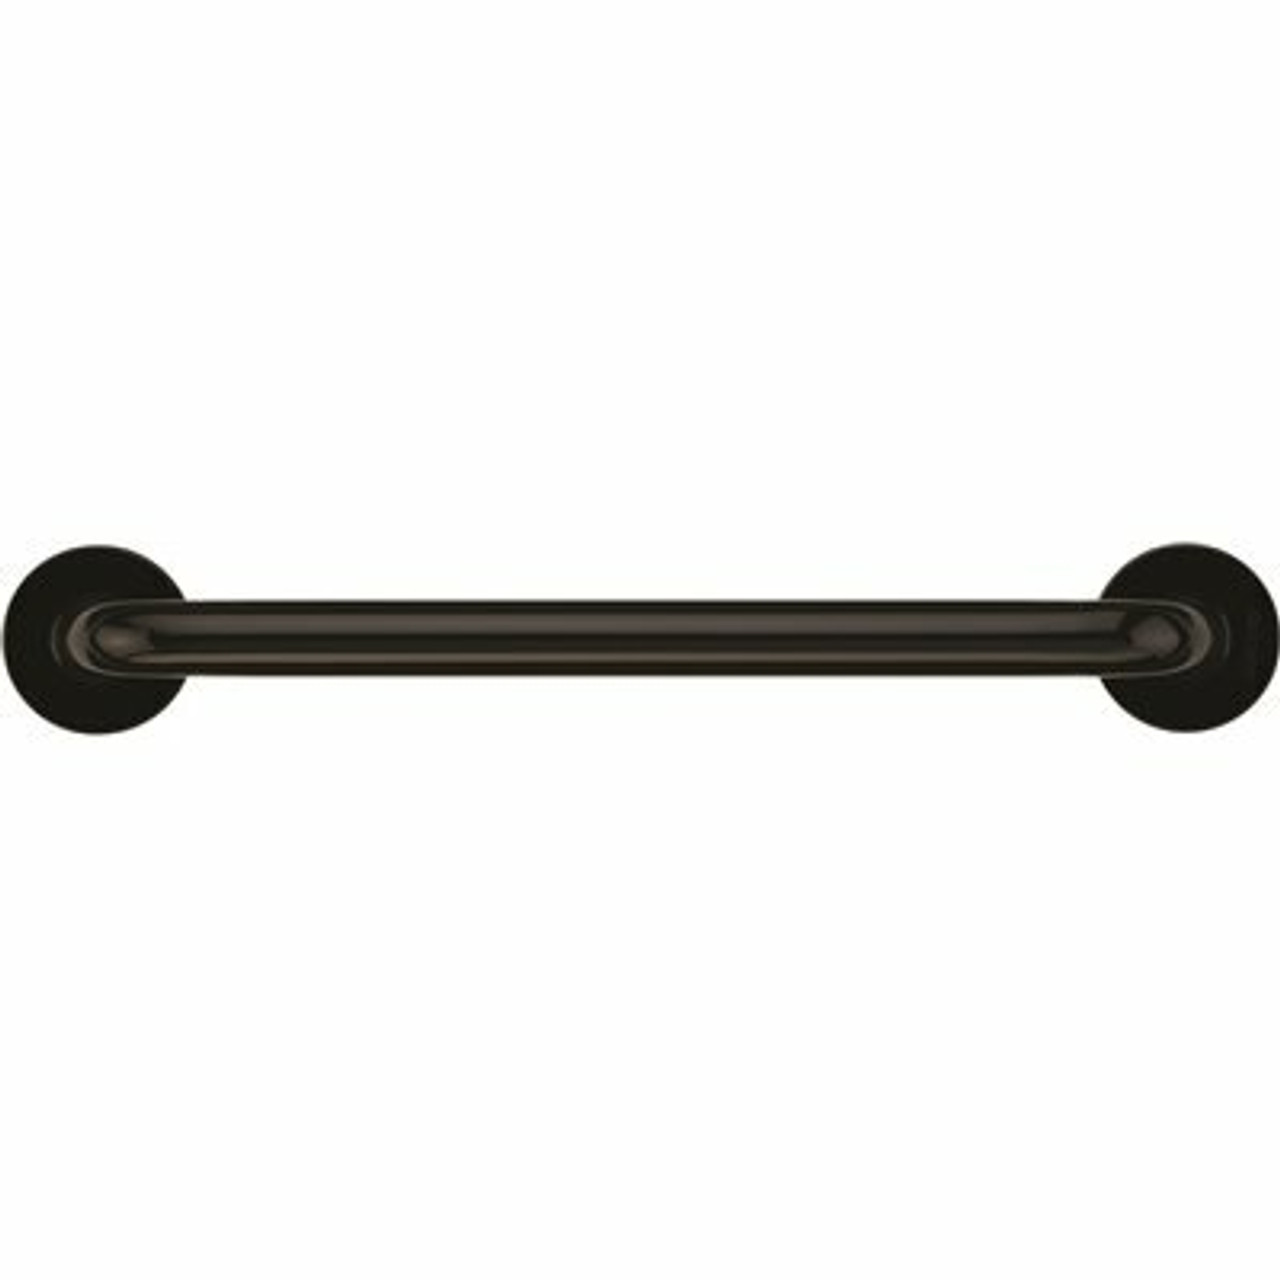 Ponte Giulio Usa 30 In. Contractor Antimicrobial Vinyl Coated Grab Bar In Black